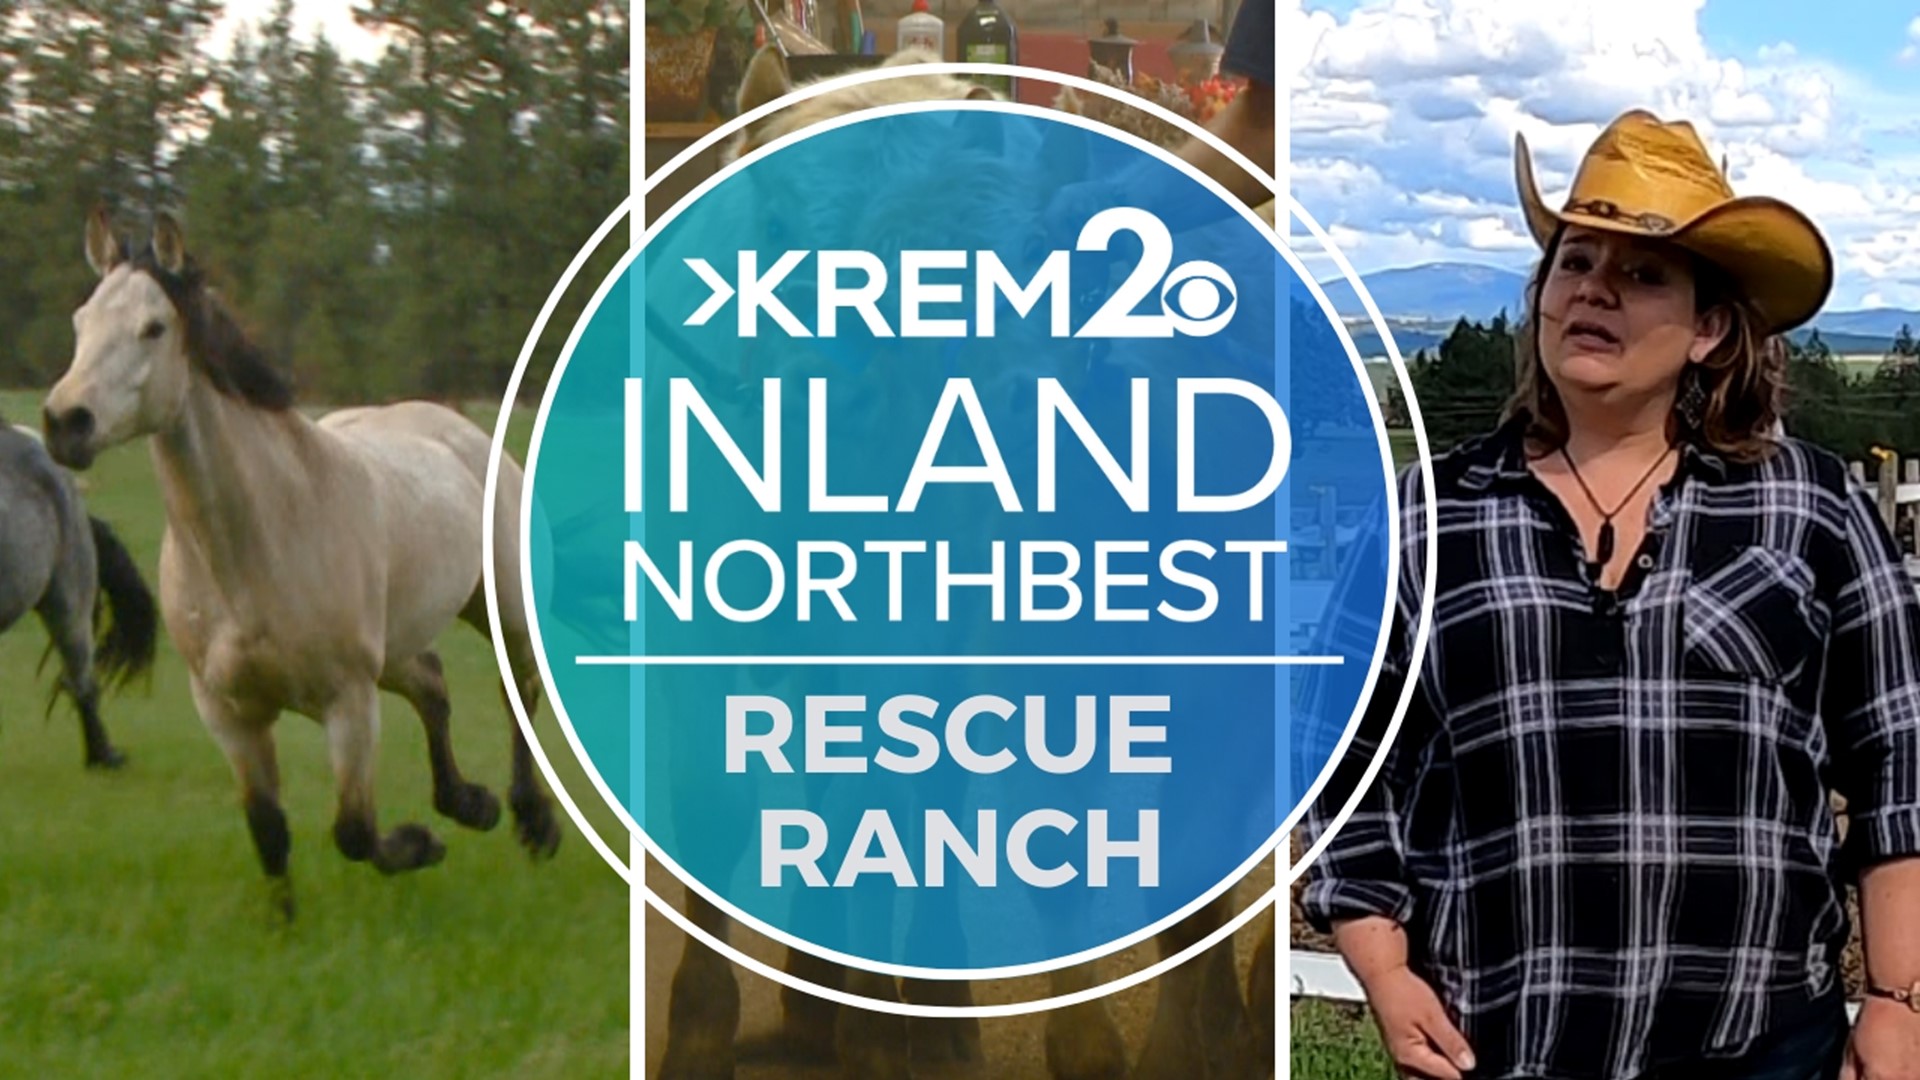 Spokane Trail Rides is home to rescued animals, horse rides, and is in need of some volunteers.